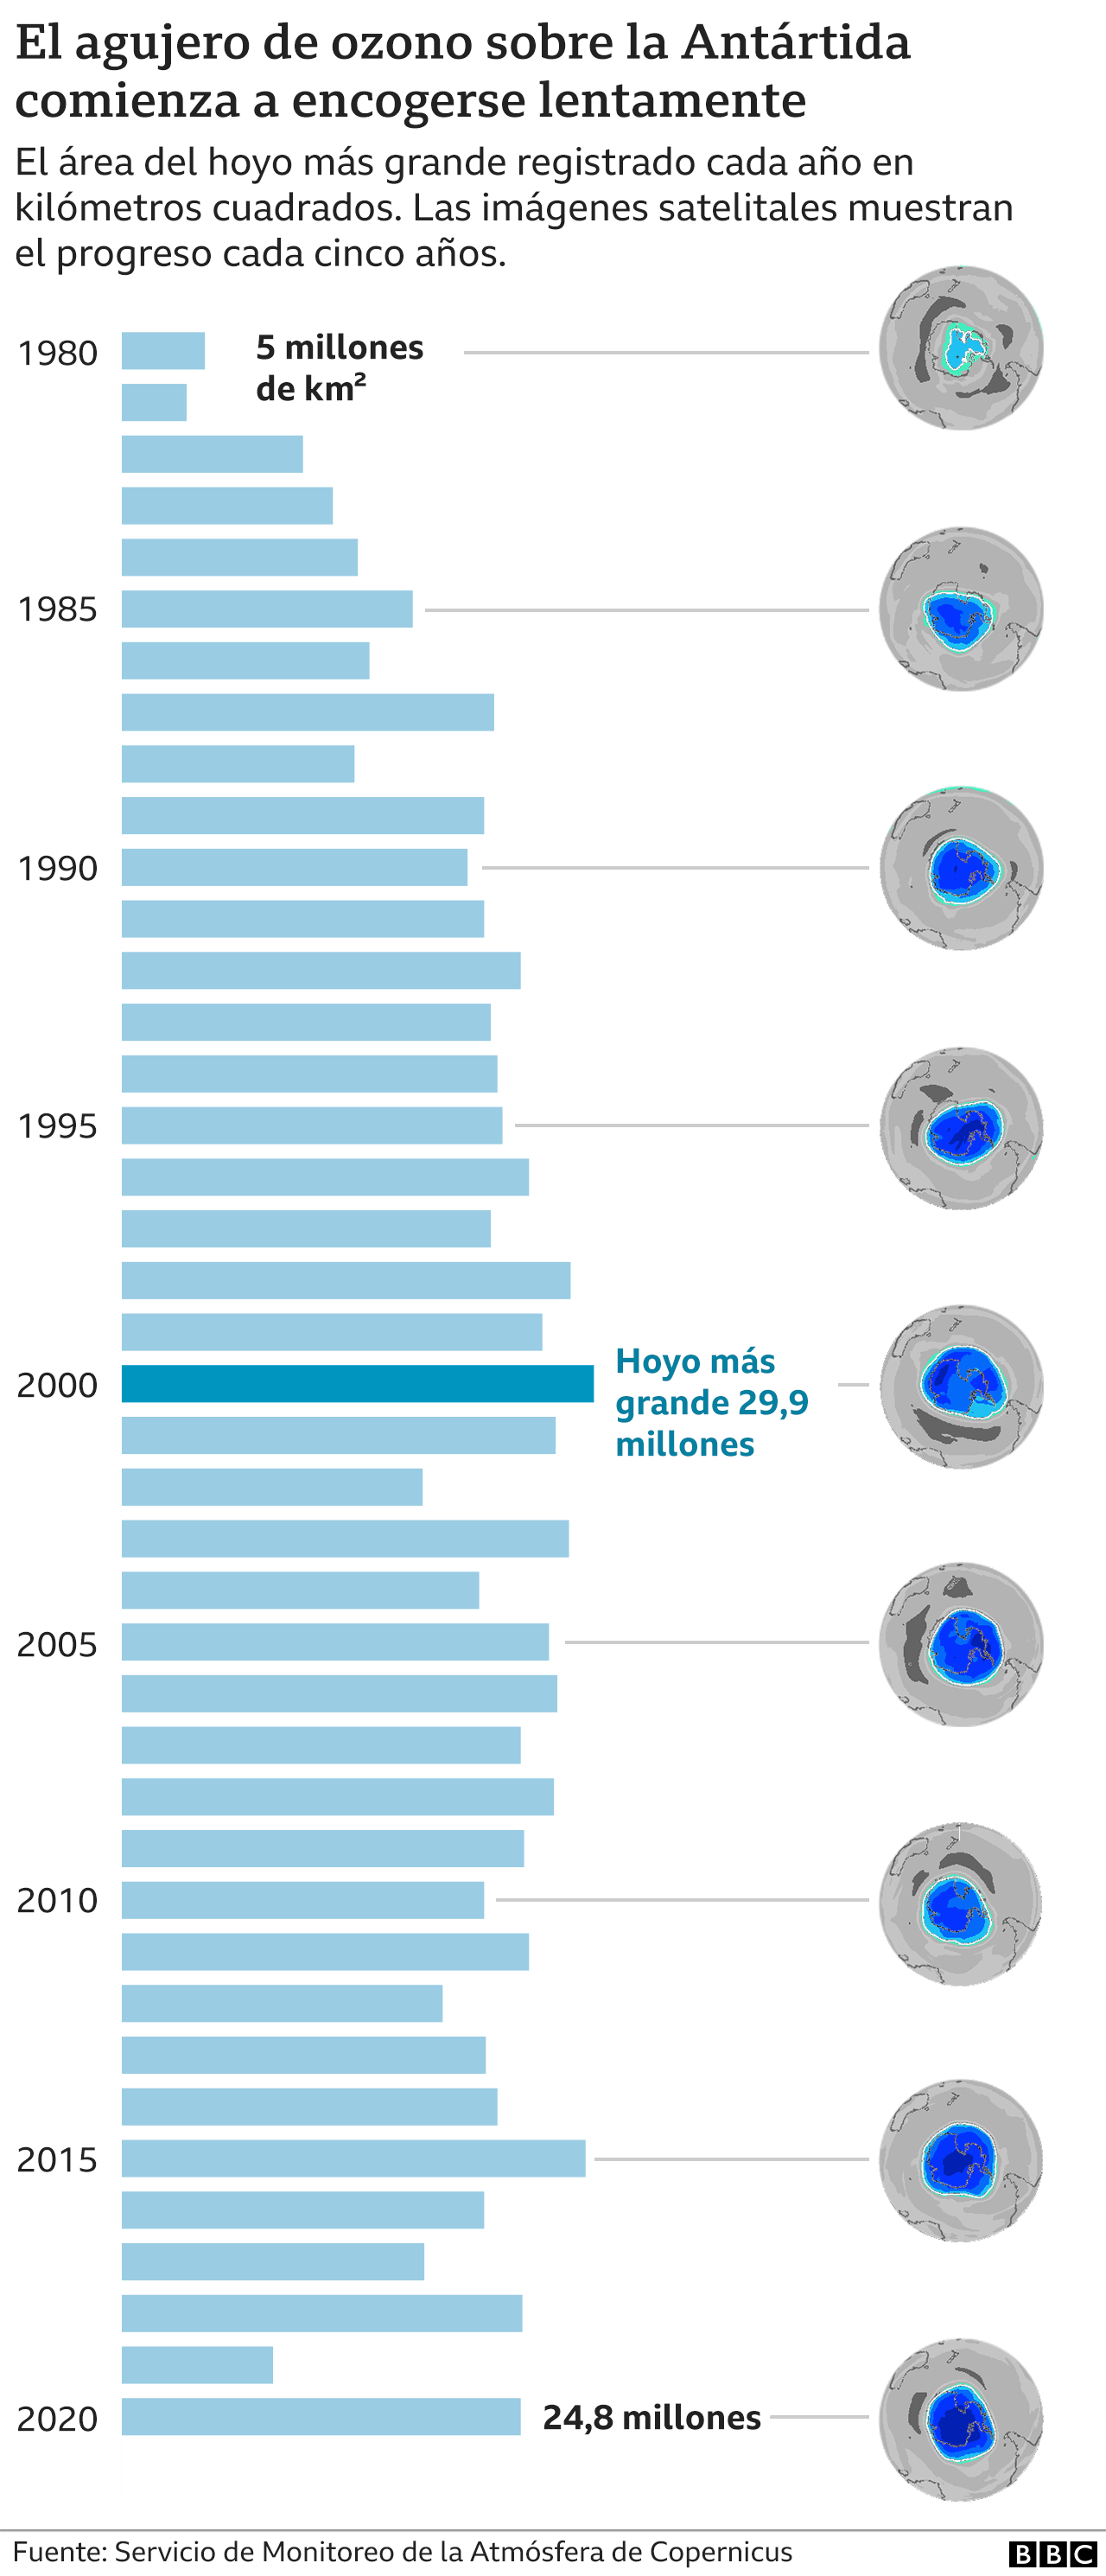 Evolution of the hole in the ozone layer